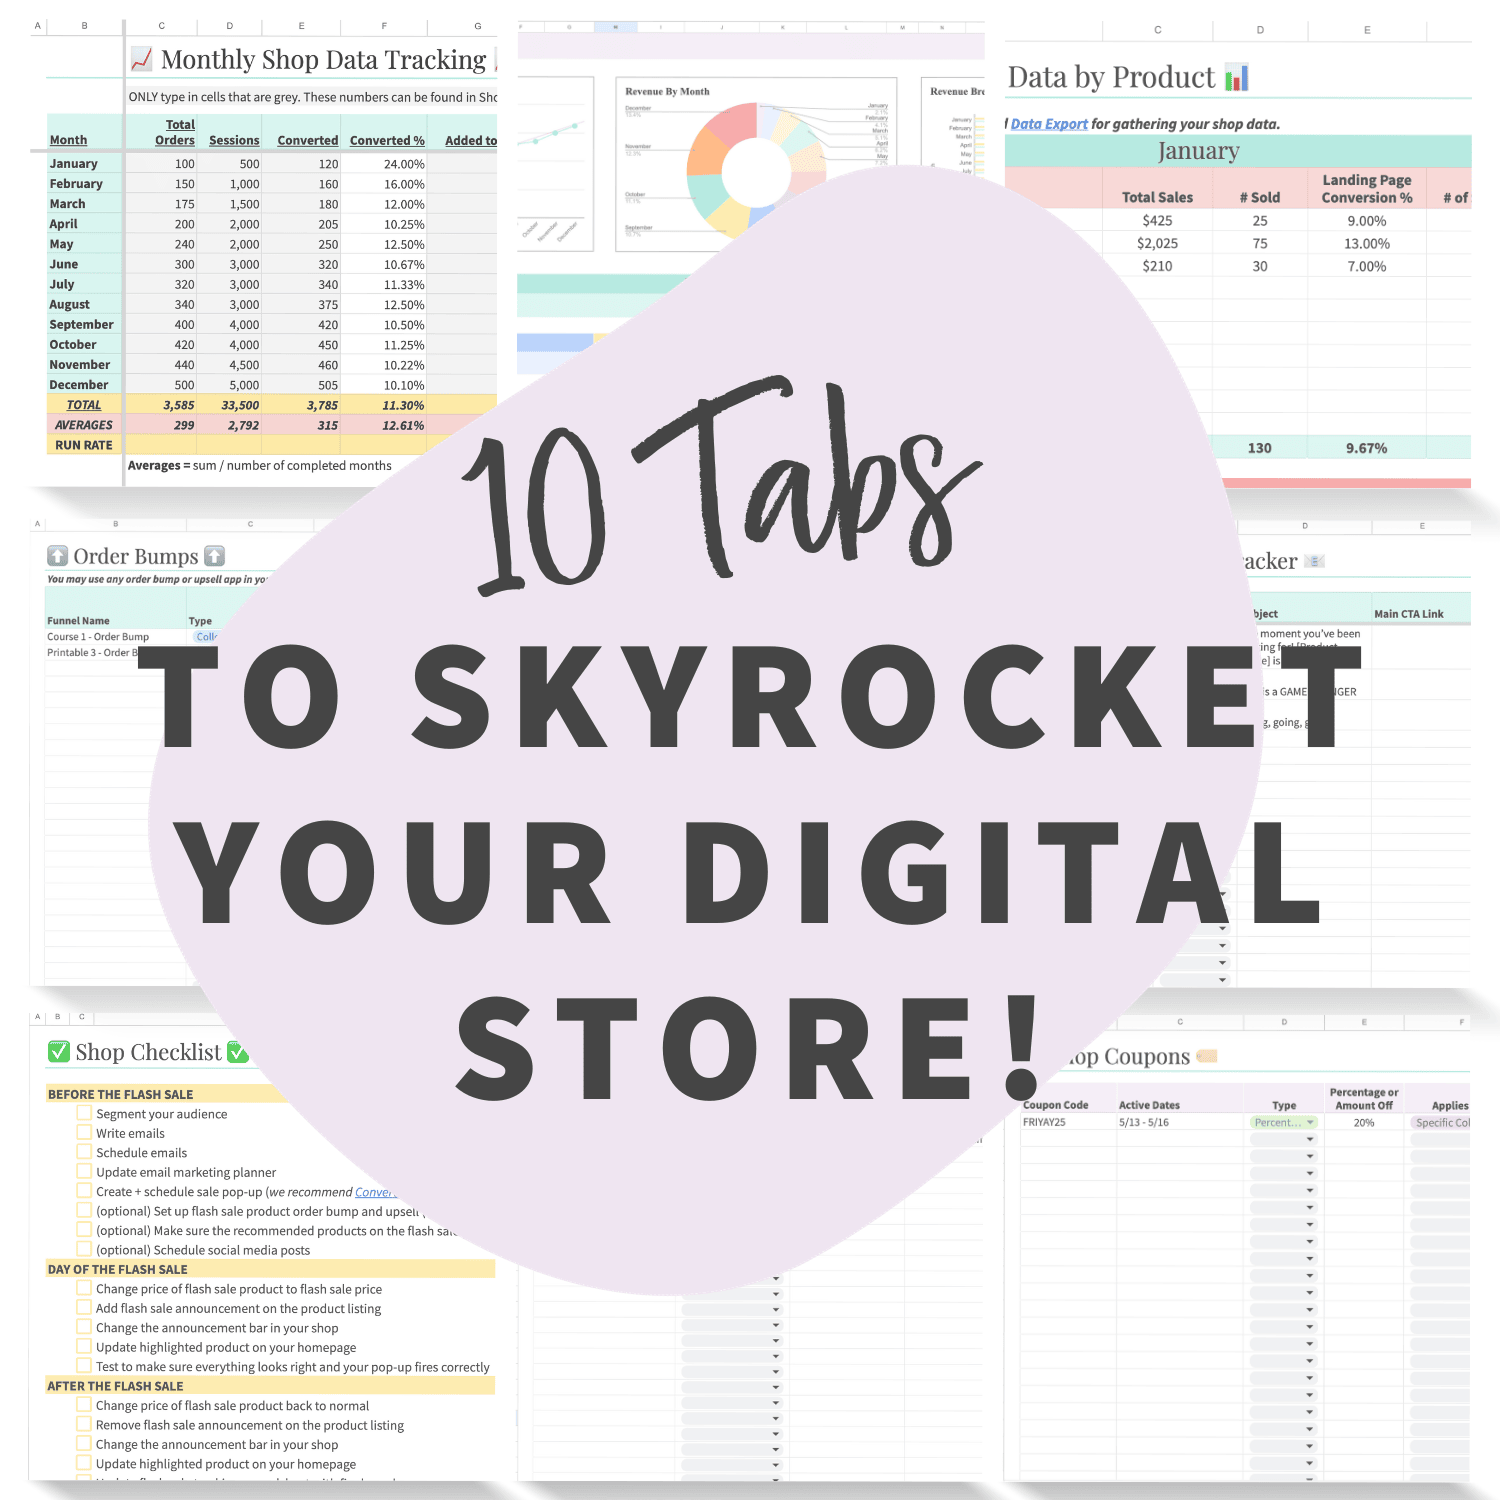 mockup of 10 tabs to skyrocket your digital store with the ultimate digital product e-commerce shop planner track your shop listings, email marketing, flash sales, and shop analytics